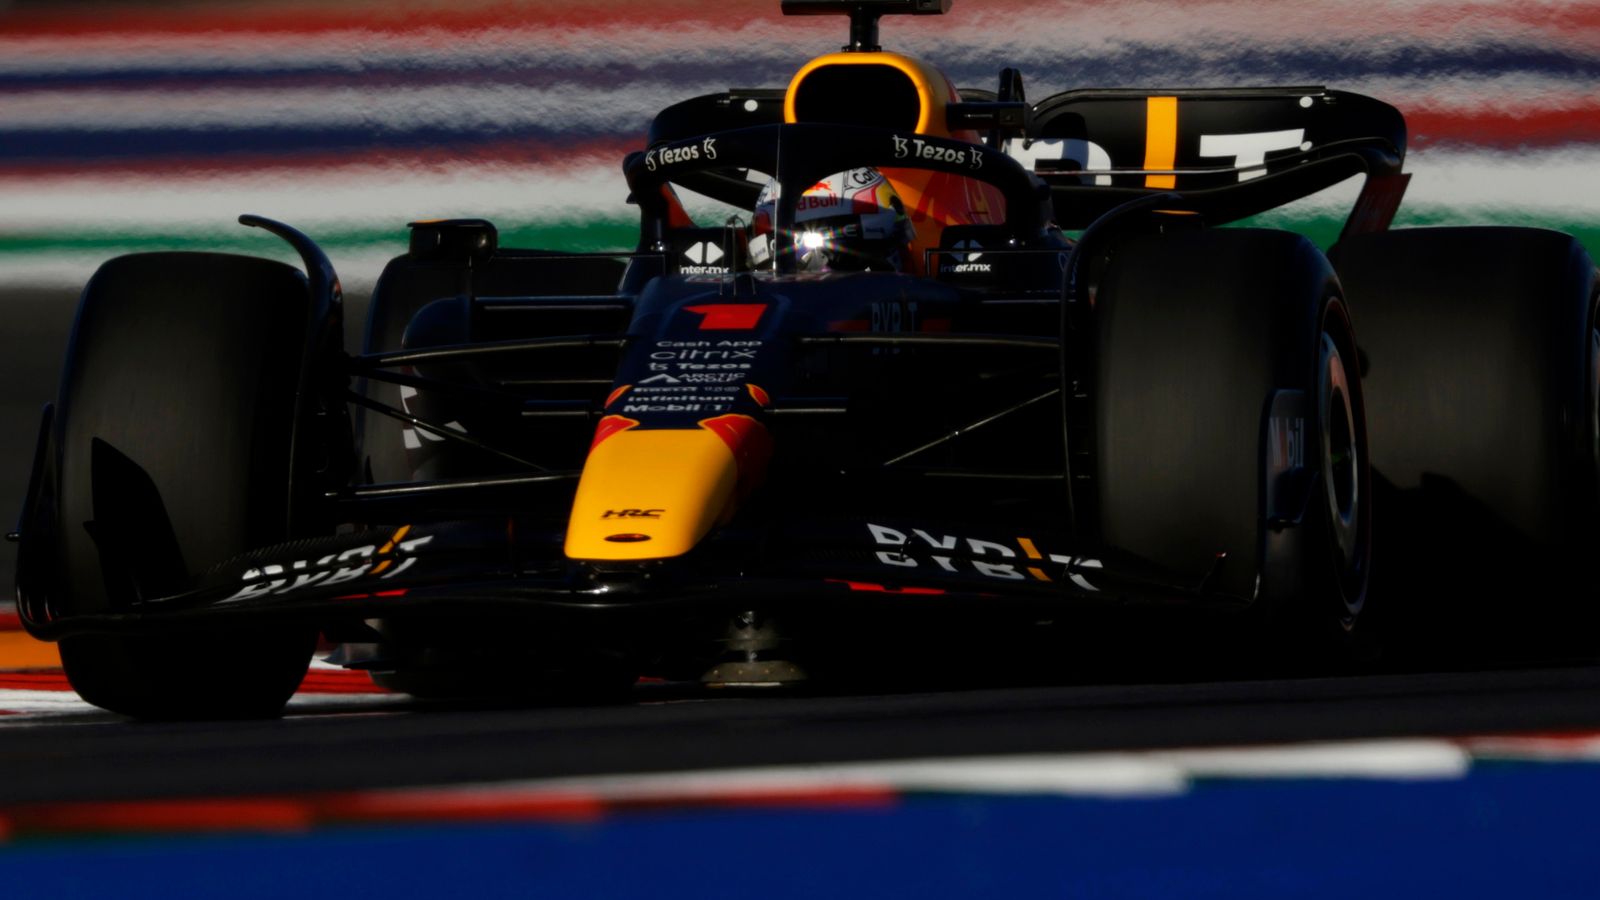 united-states-gp-max-verstappen-tops-final-practice-for-red-bull-charles-leclerc-has-grid-penalty-confirmed